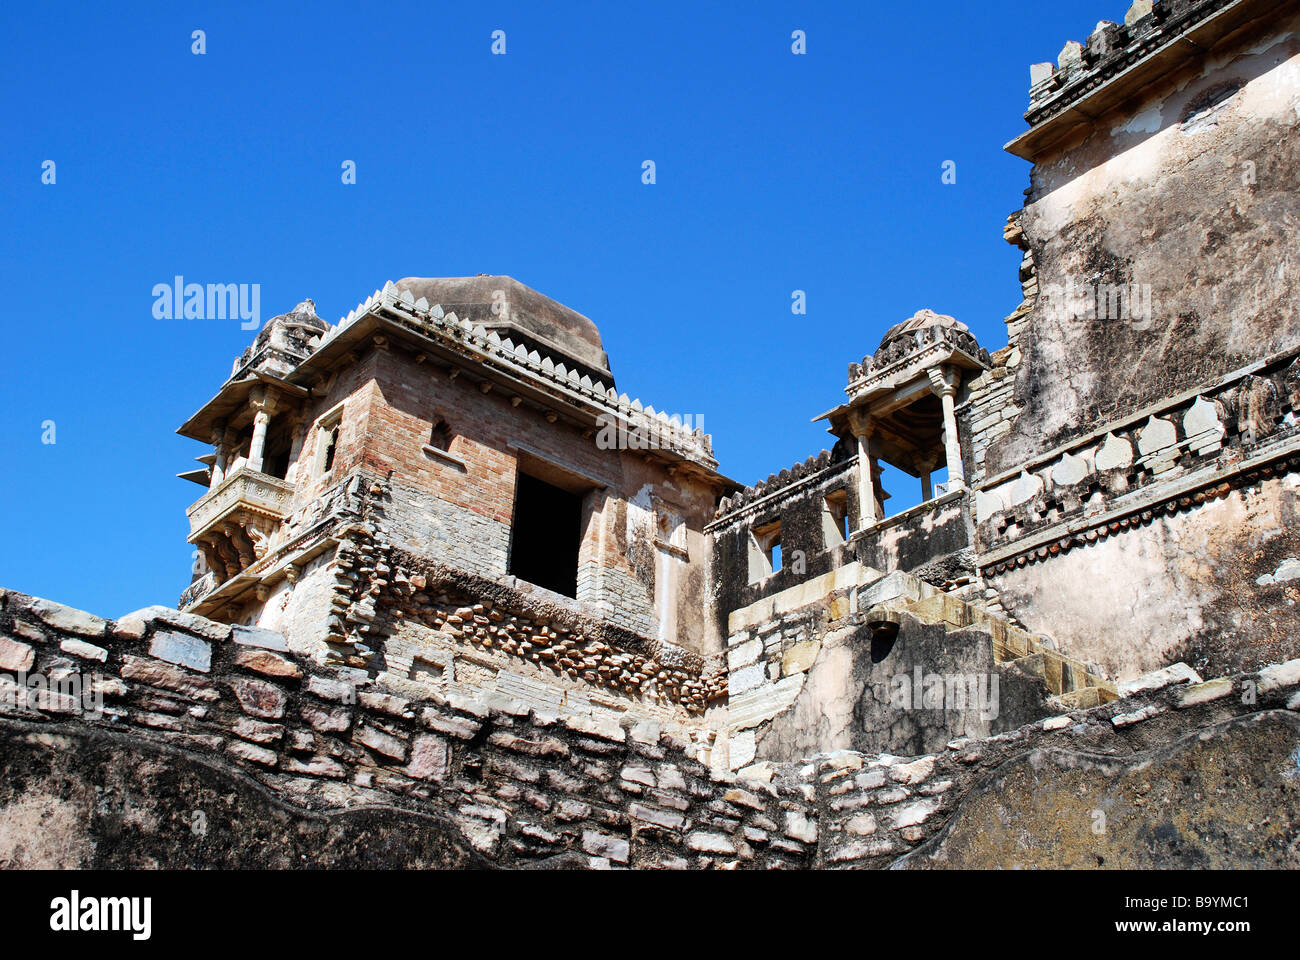 Chittorgarh, situated on South Eastern plateau of Aravali mountain ranges,  Rajasthan State, India. Stock Photo